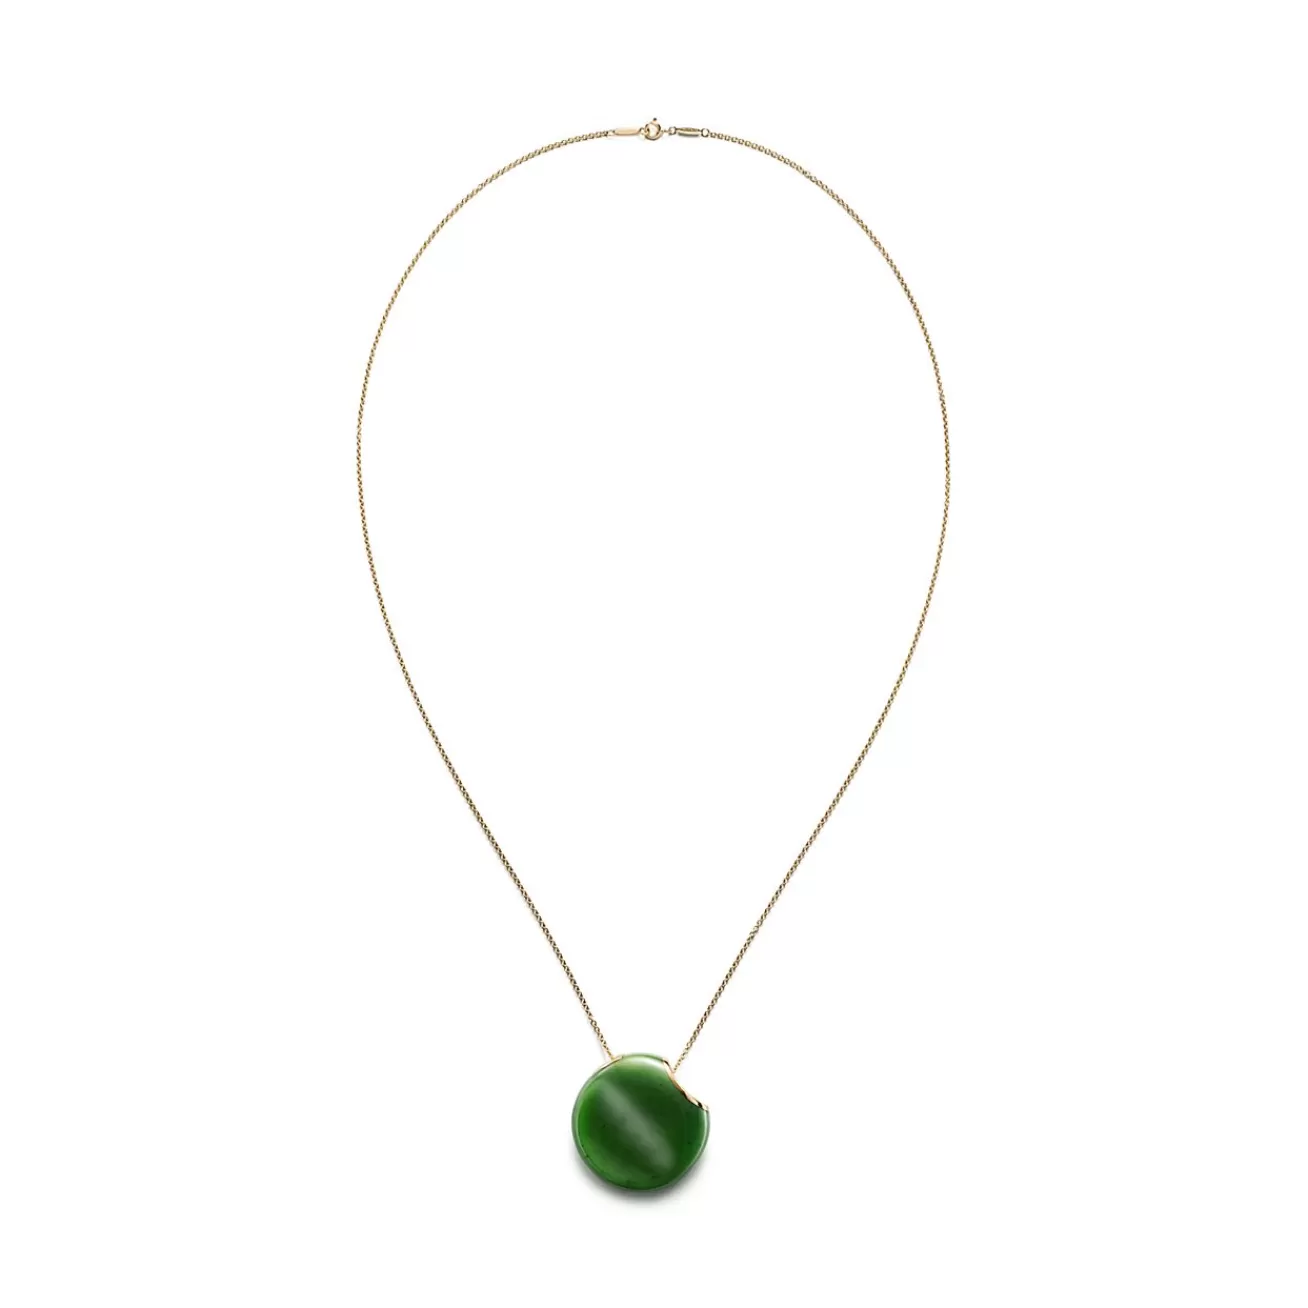 Tiffany & Co. Elsa Peretti® Touchstone Pendant in Green Jade and Yellow Gold | ^ Necklaces & Pendants | New Jewelry